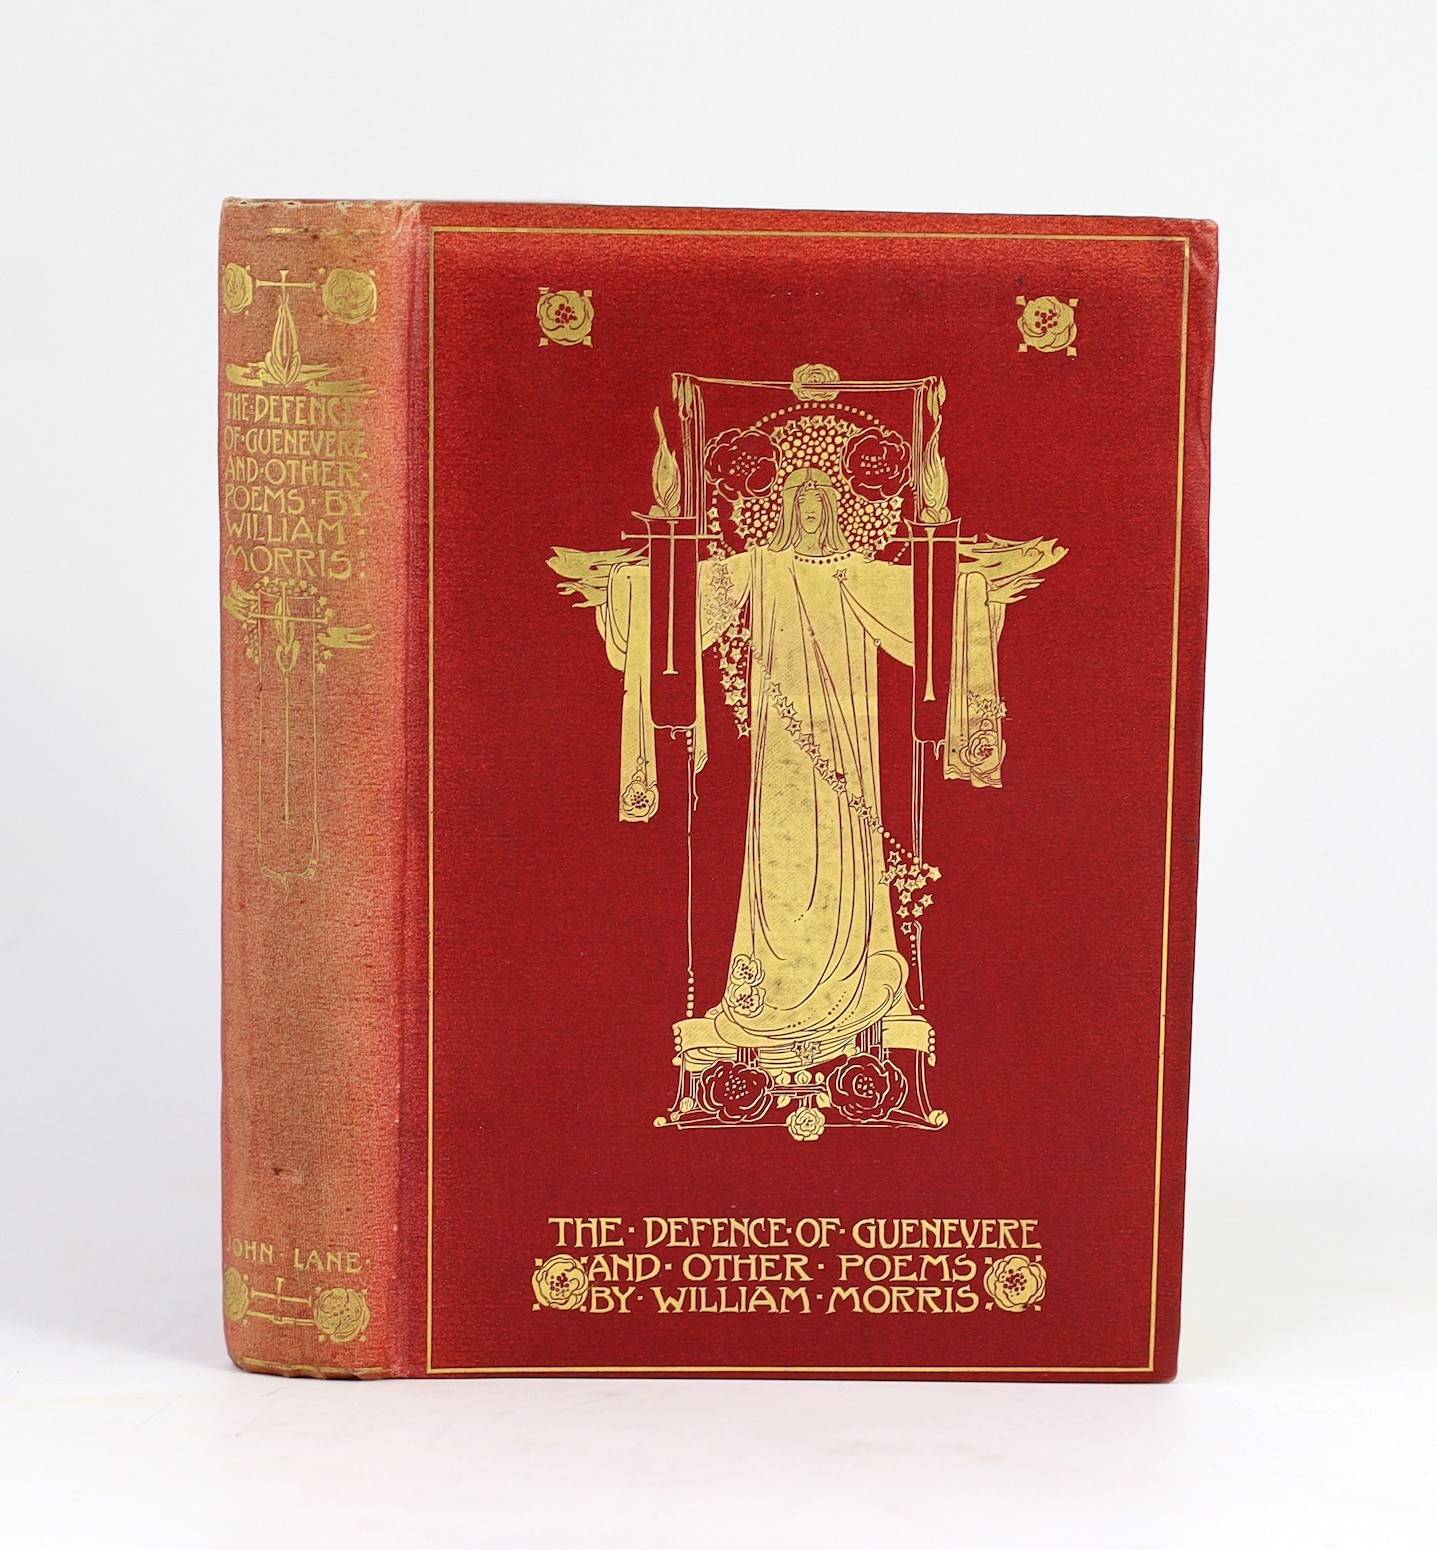 Morris, William - The Defence of Guenevere, 1st edition, illustrated with 24 plates by Jessie M. King, 8vo, original red cloth, spine faded, John Lane, The Bodley Head, London 1904